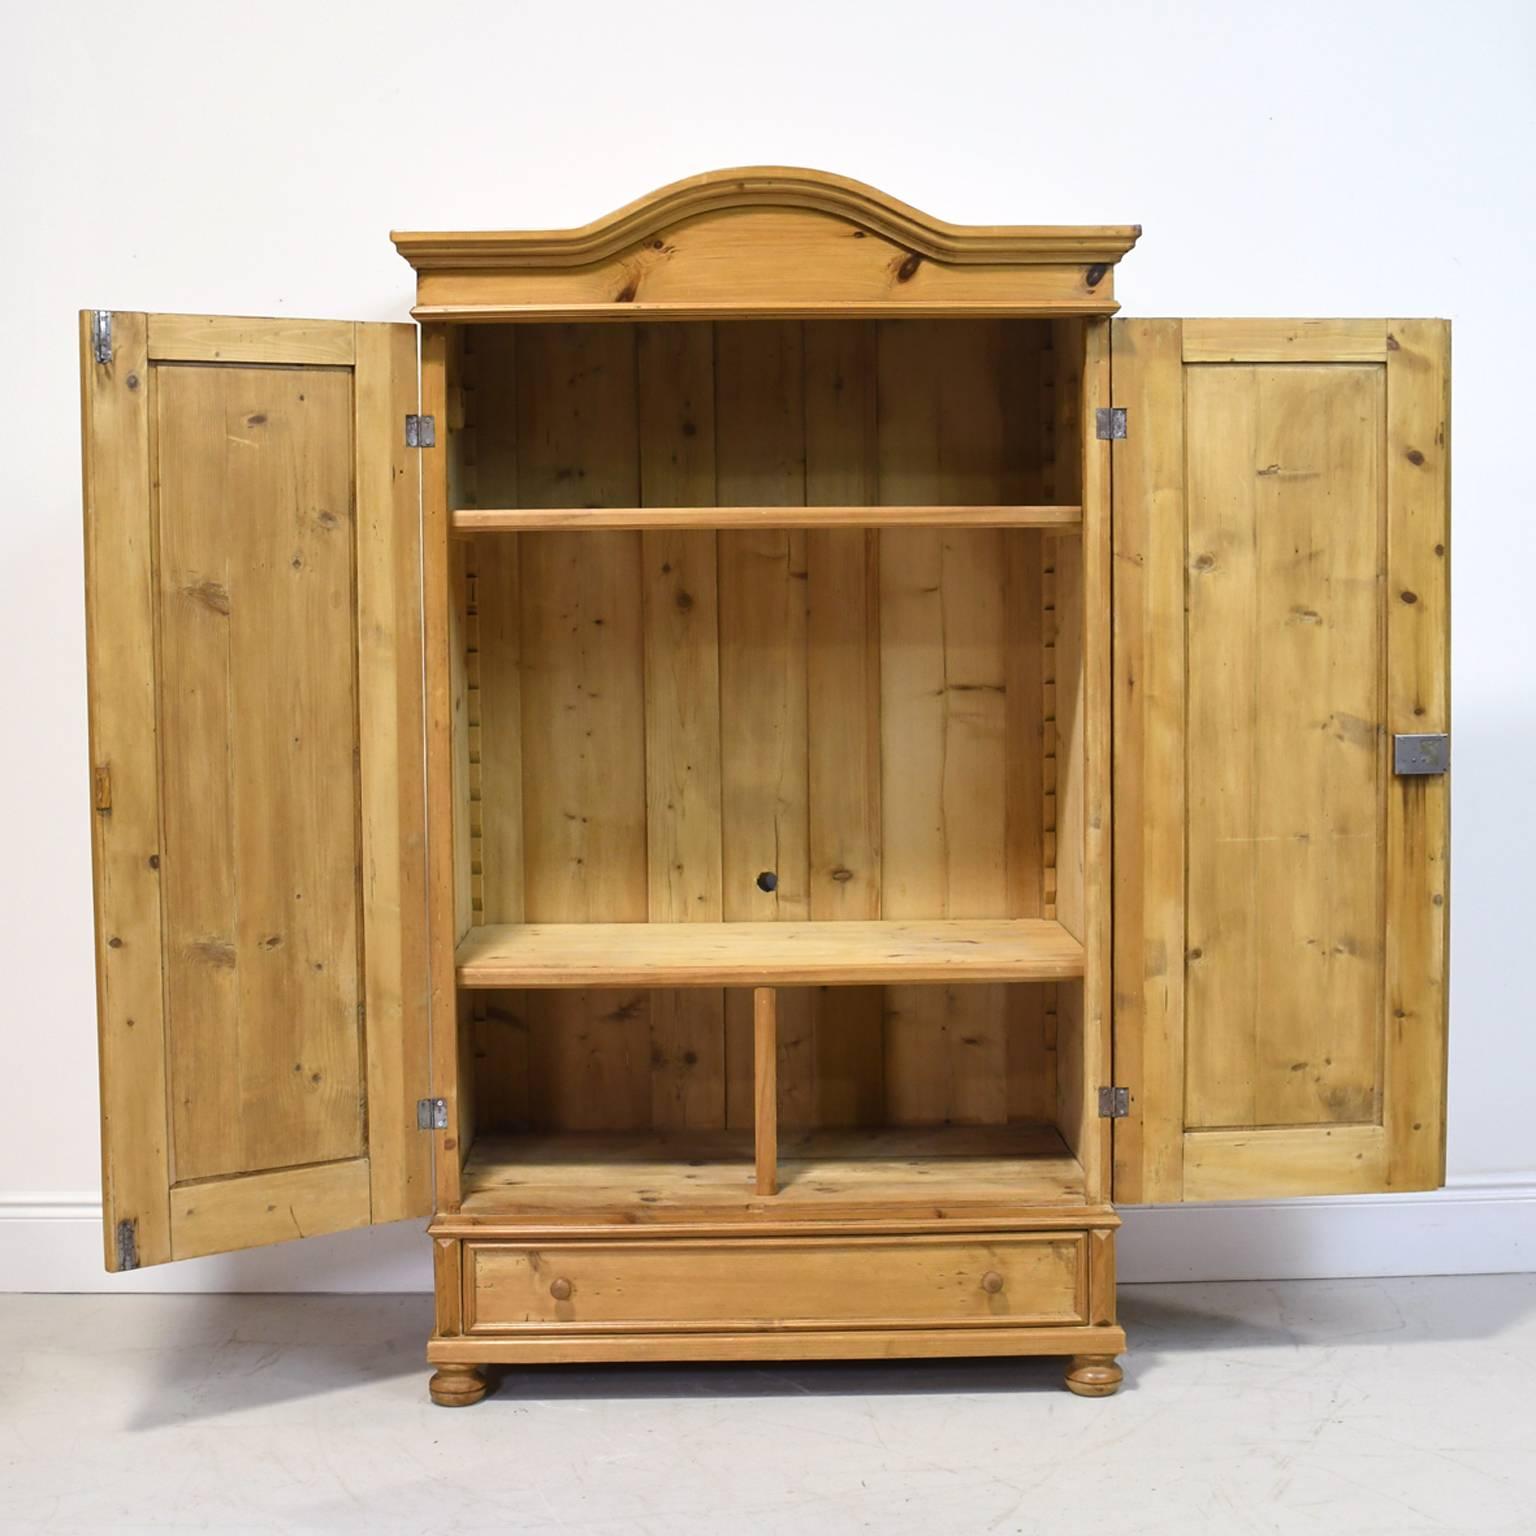 From the Austro-Hungarian Empire, a lovely pine armoire with curved bonnet, two doors with recessed panel and original nickel key plates, exterior drawer with turned wooden knobs, and bun feet. Comes with working lock and key, circa 1860.
A great